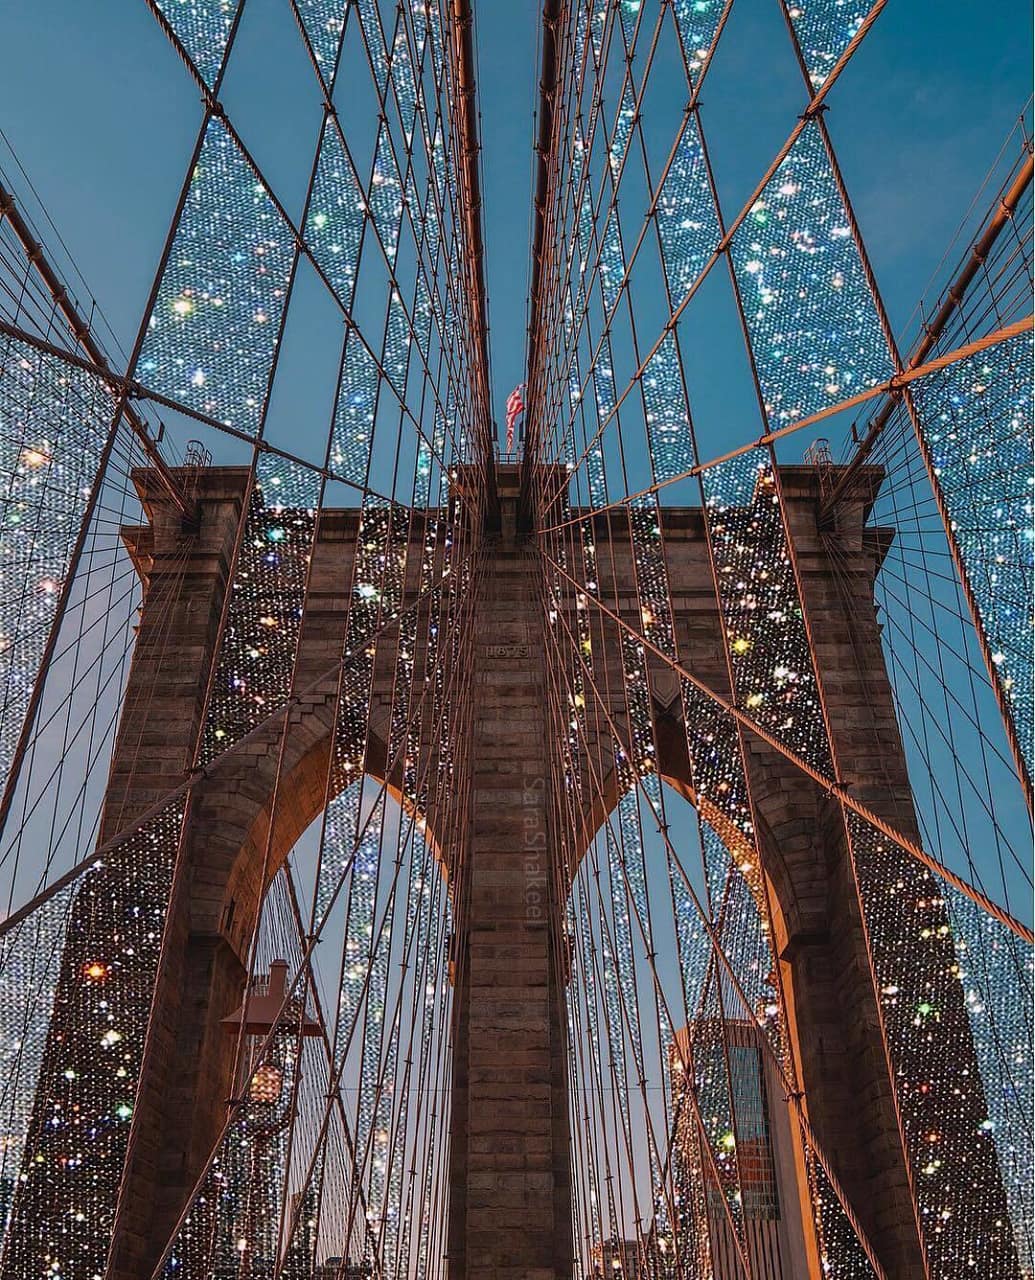 Brooklyn Bridge lit up with lights in the night - City